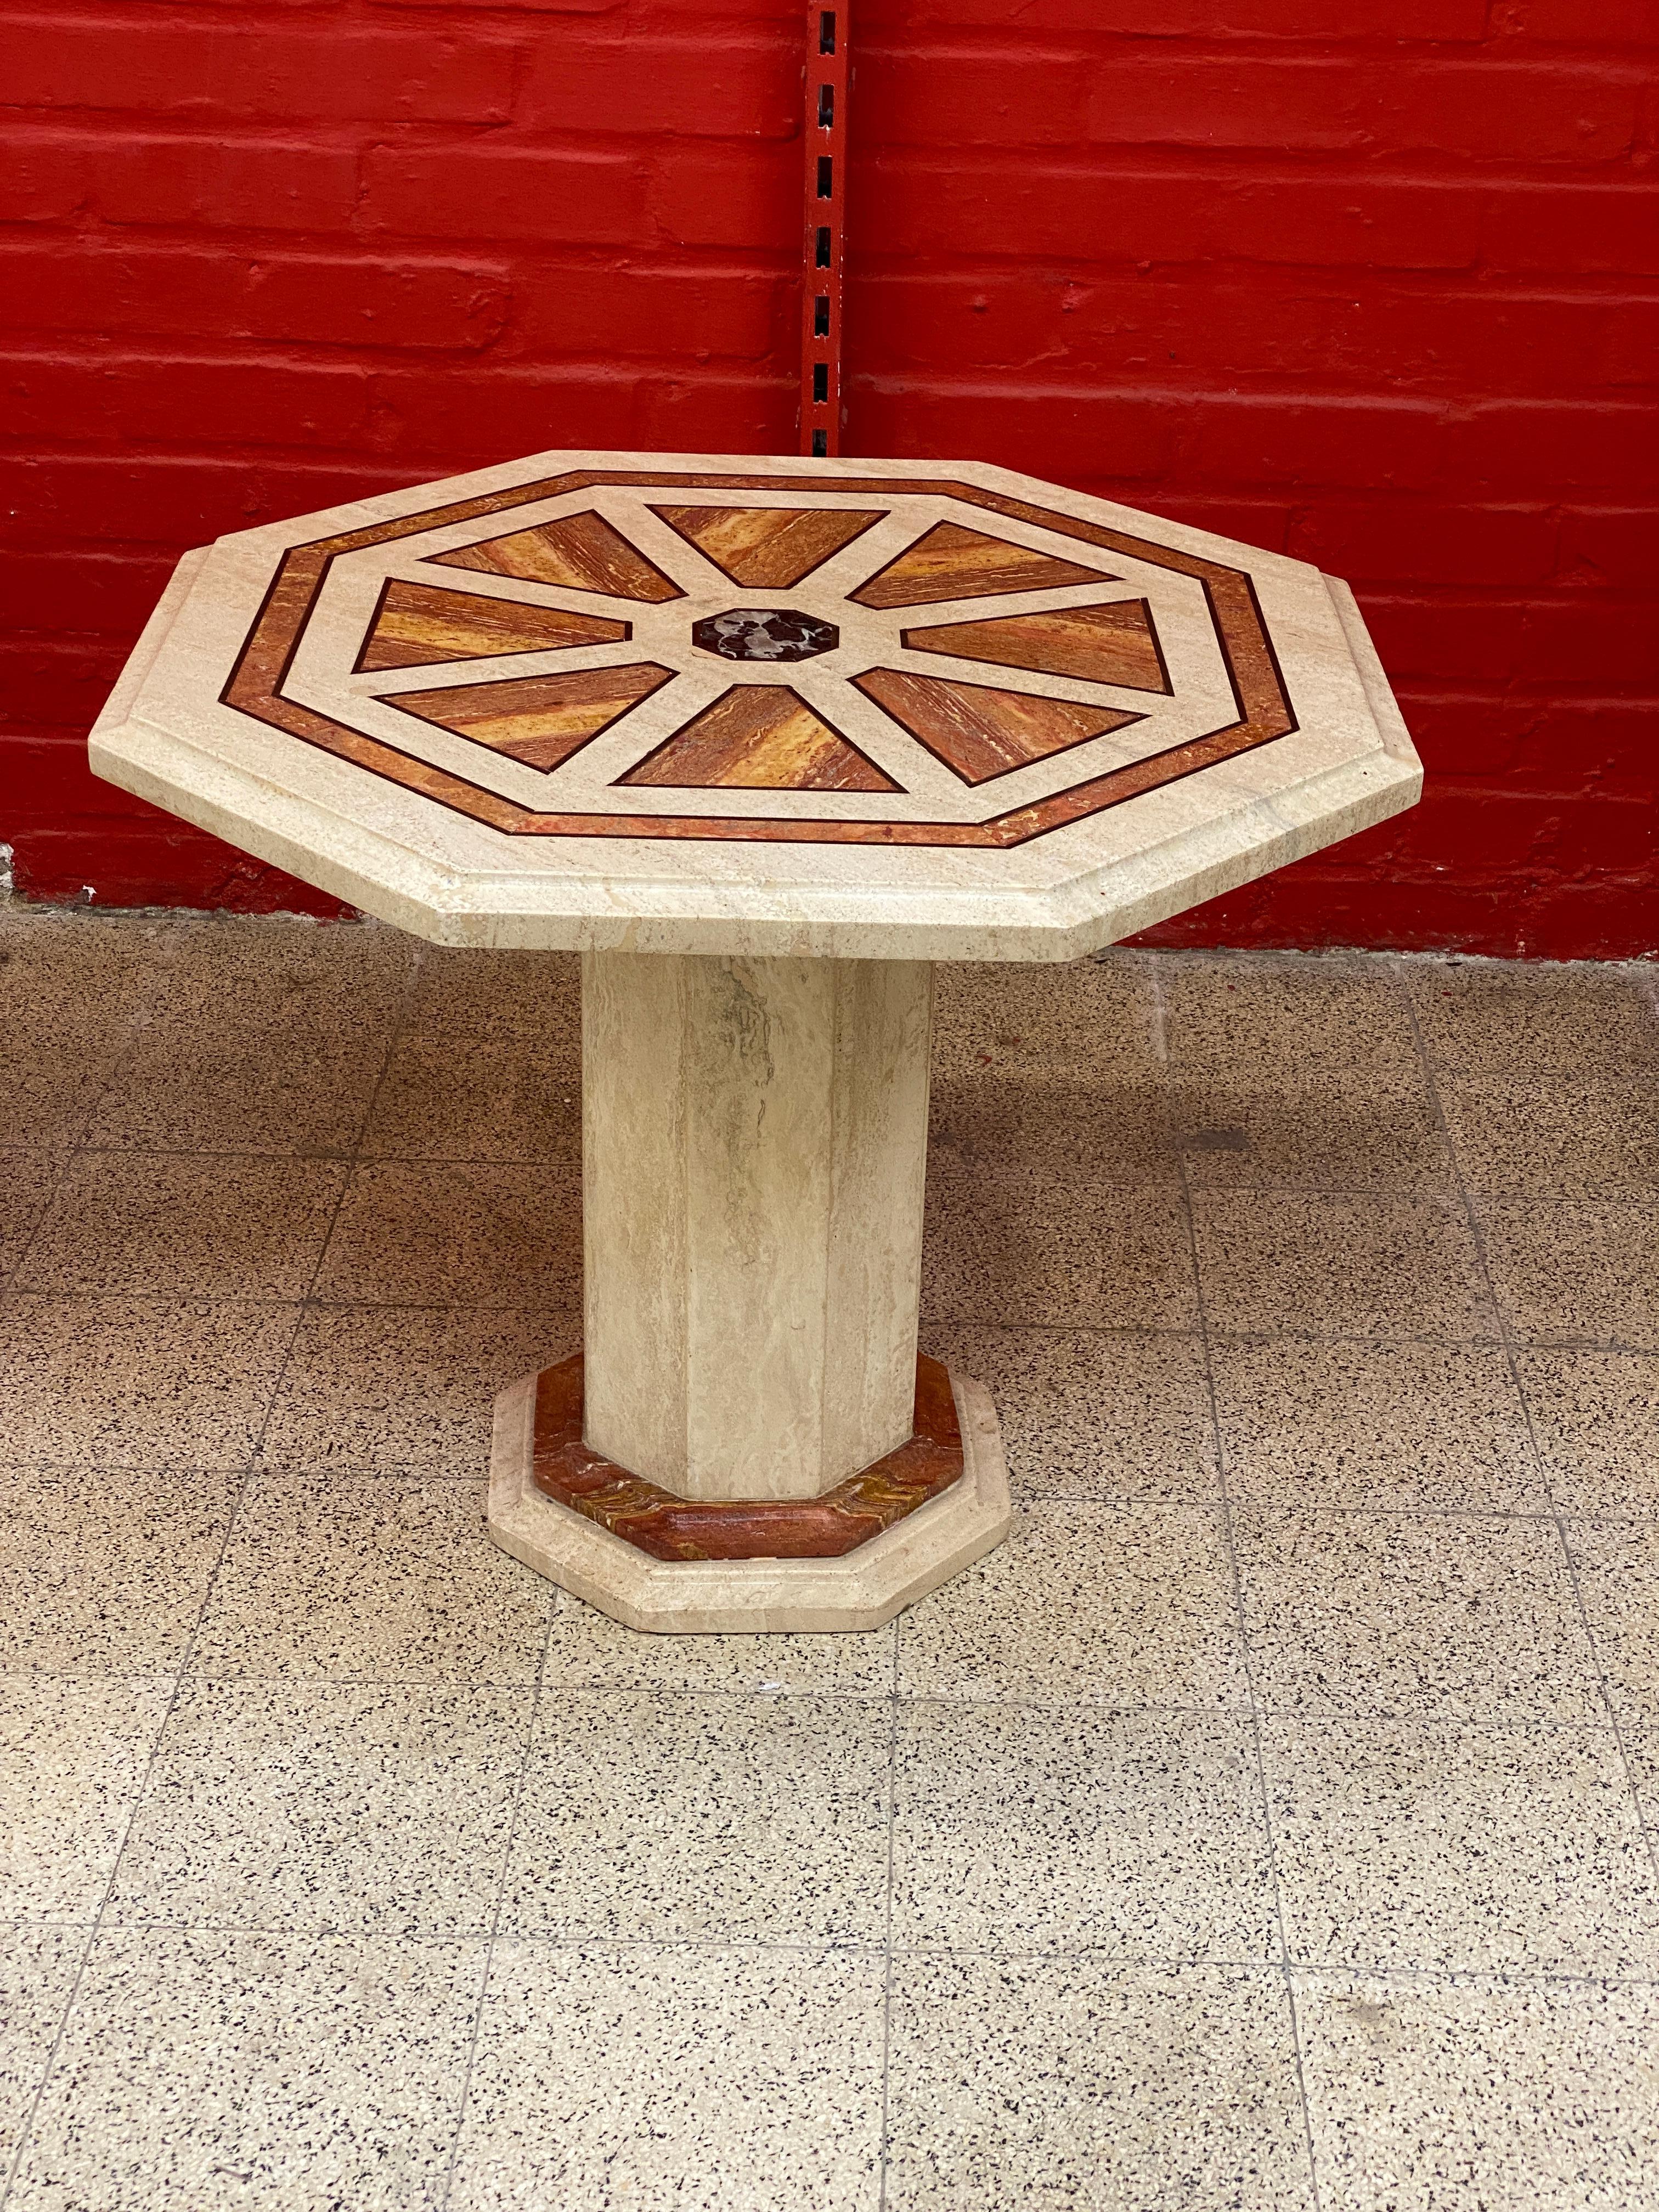 2 travertine side tables, with brass and marble inlay, circa 1970.